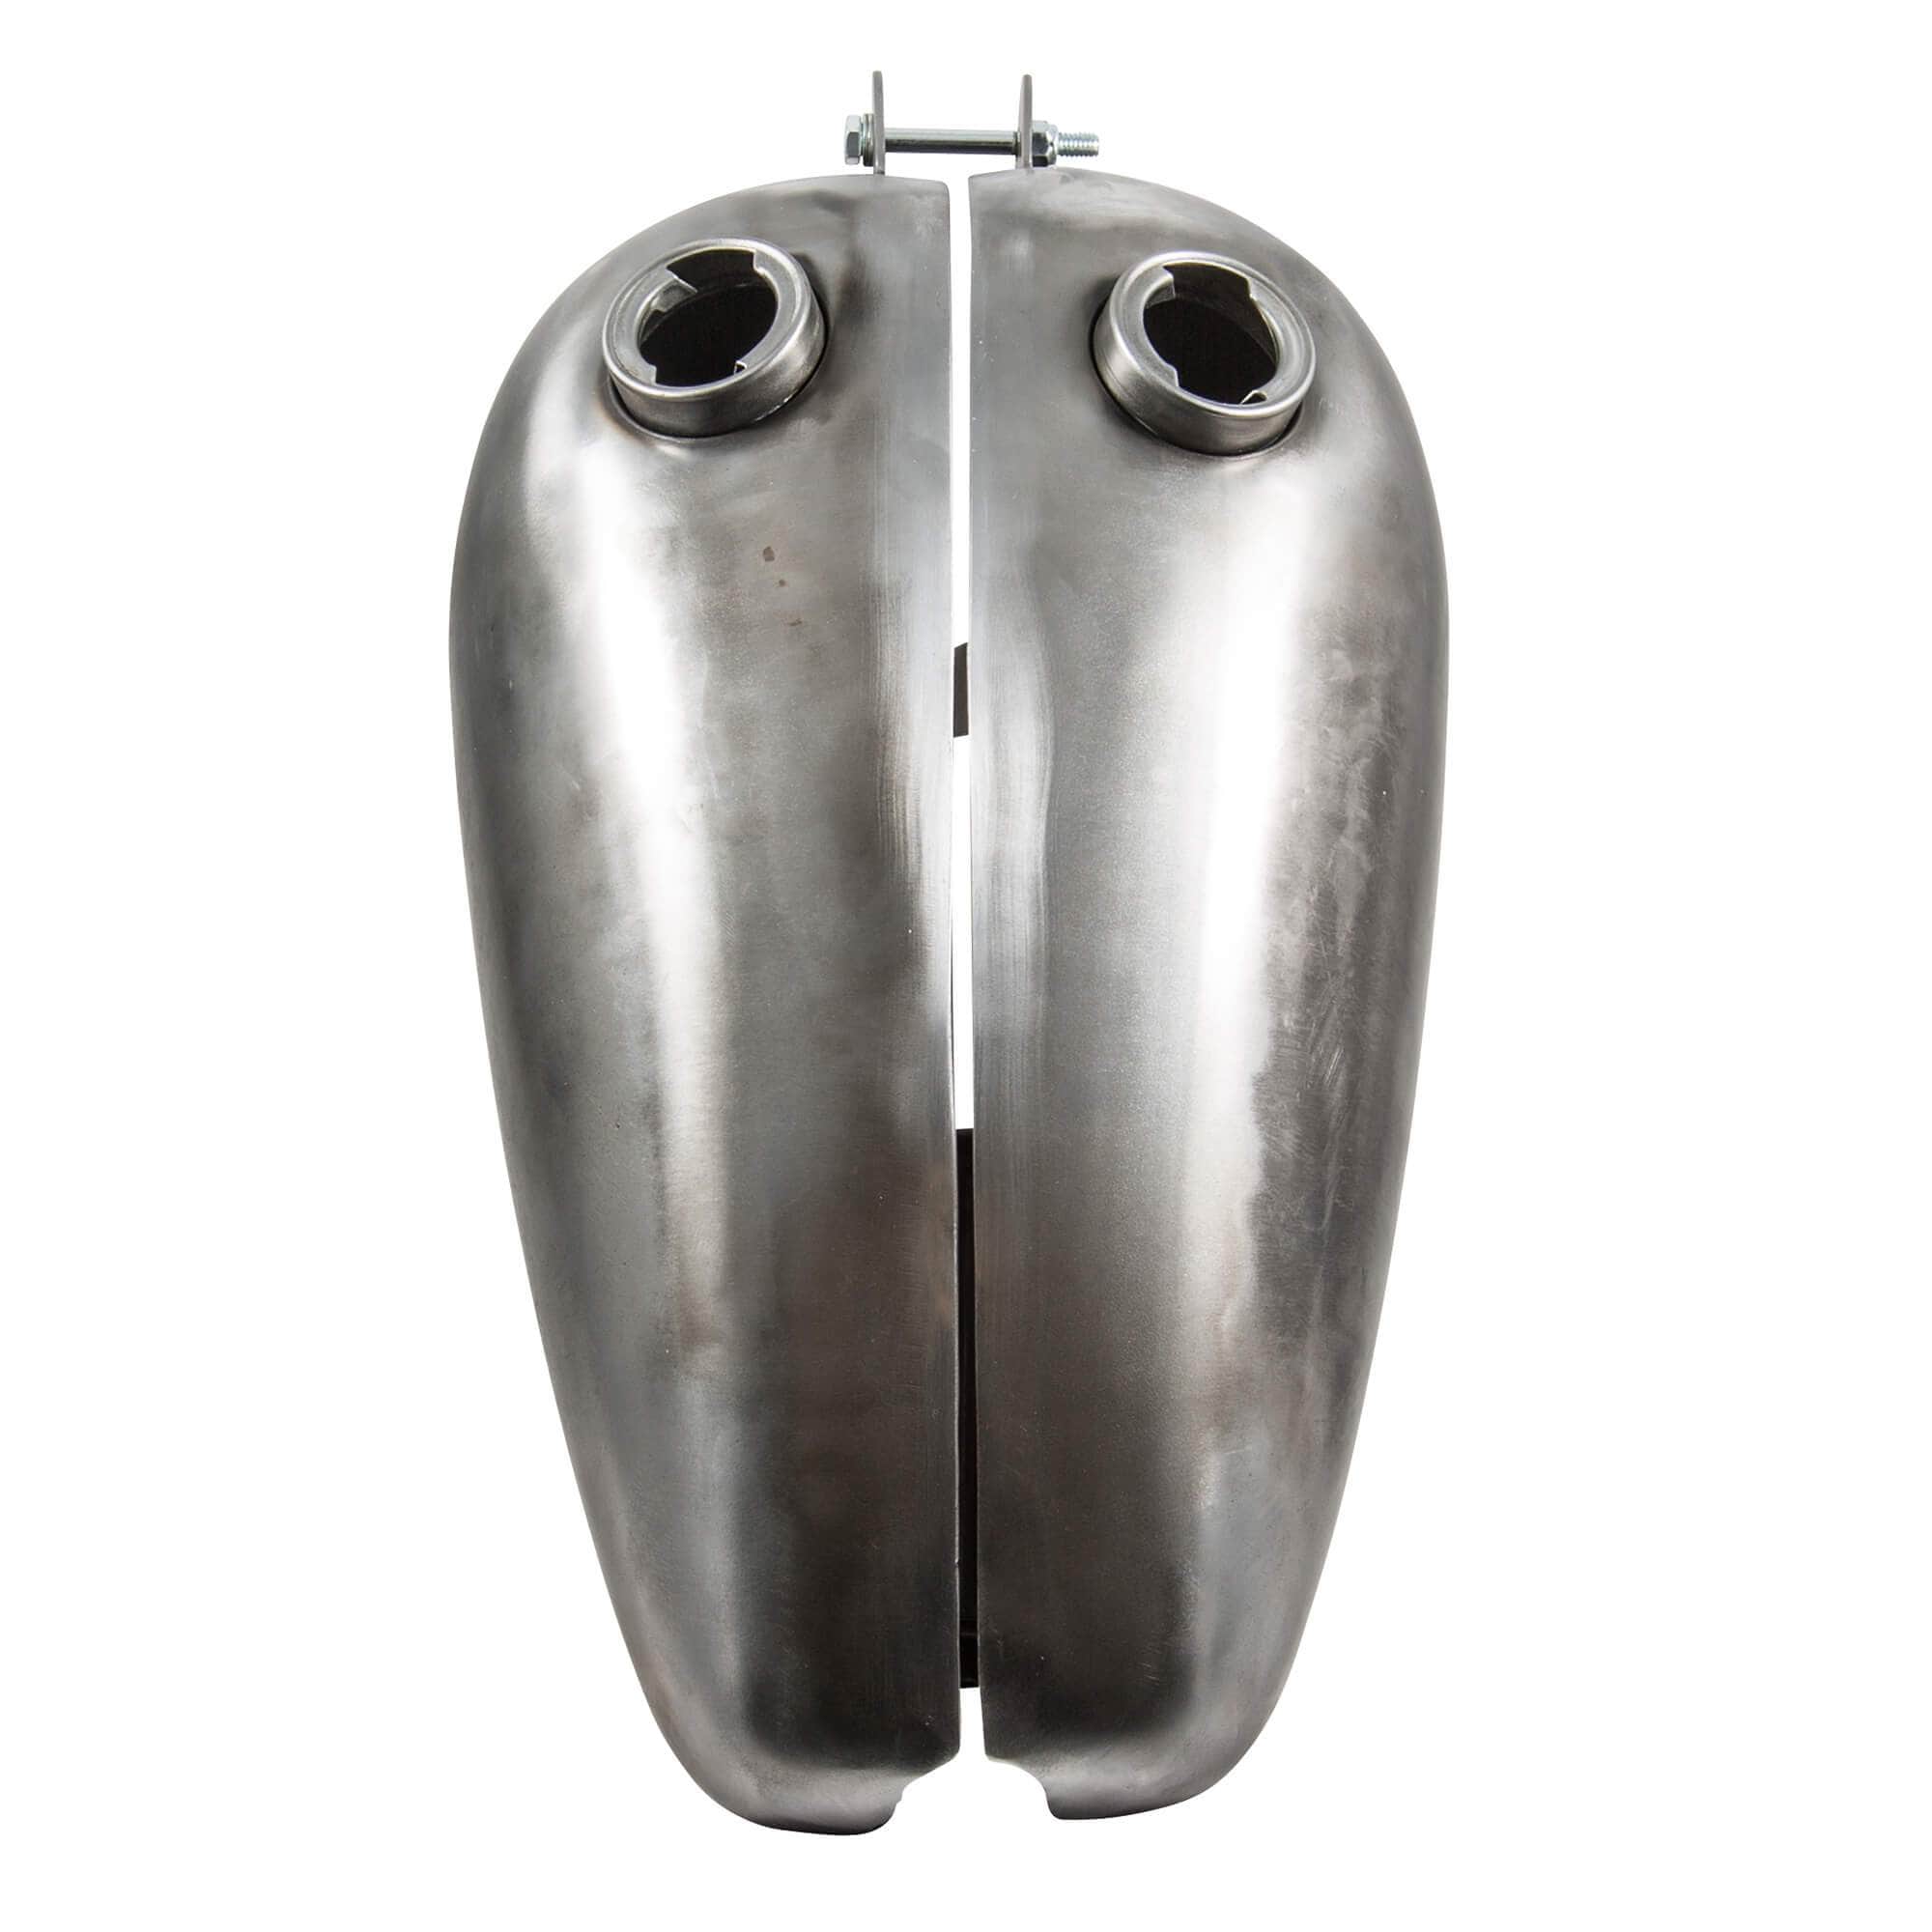 Motorcycle Gas Tank Coating - Search Shopping